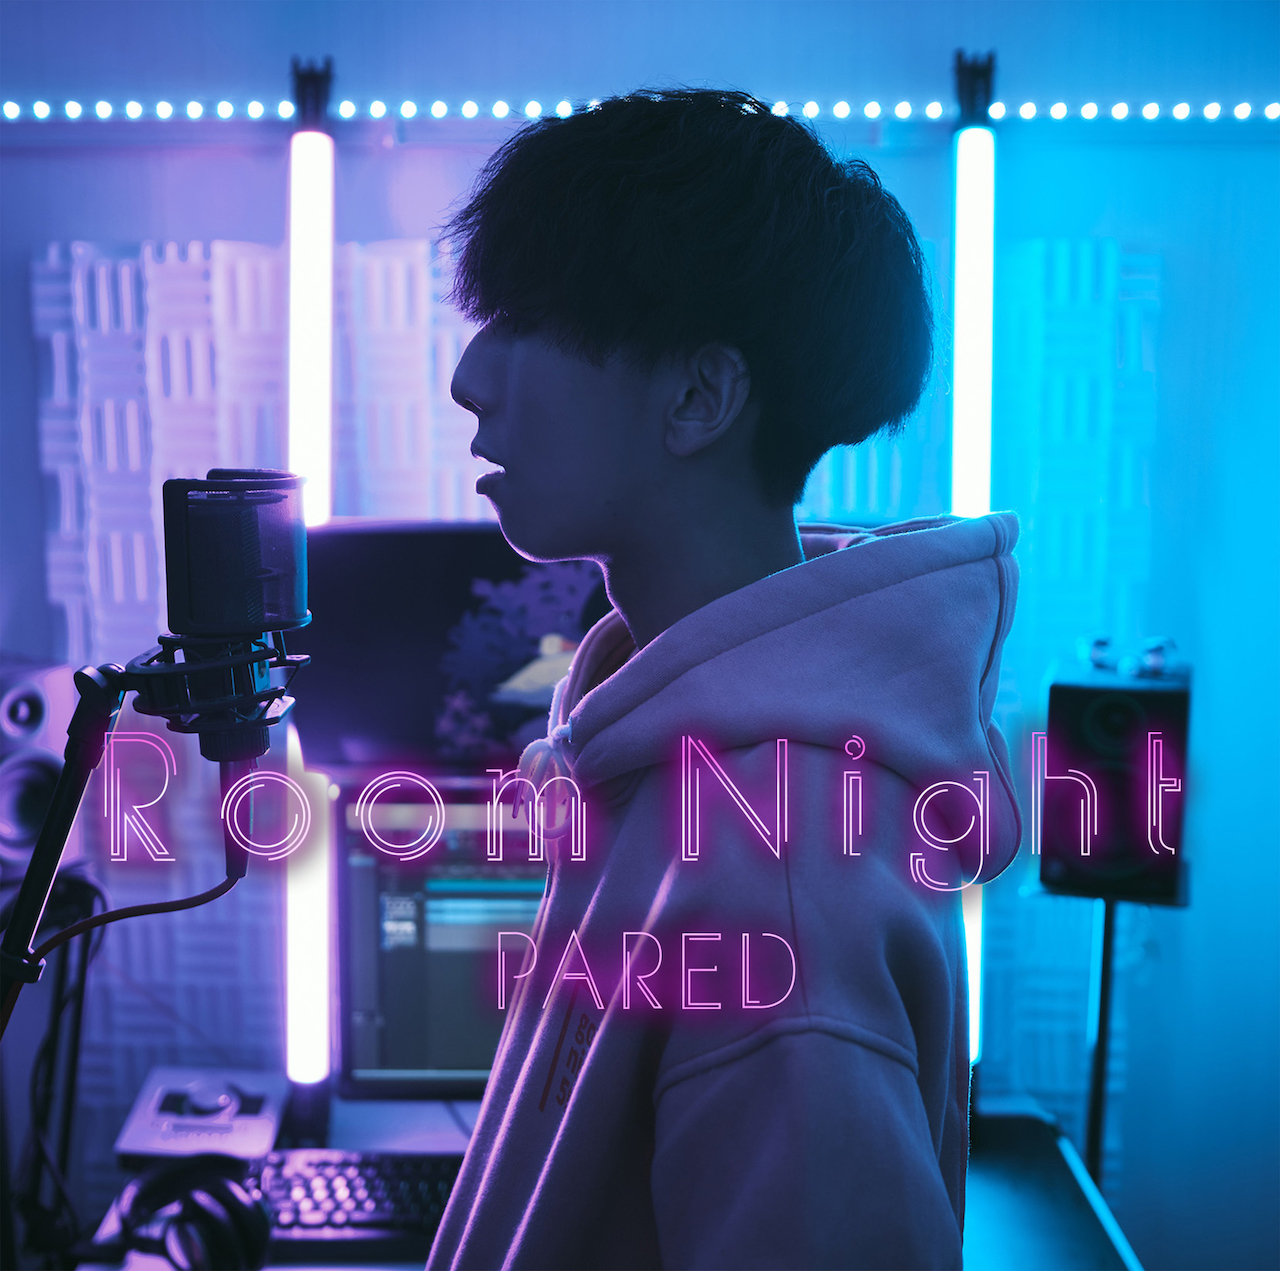 PARED “Room Night” Limited Edition（CD+DVD）Release on March16th,2022 No.1